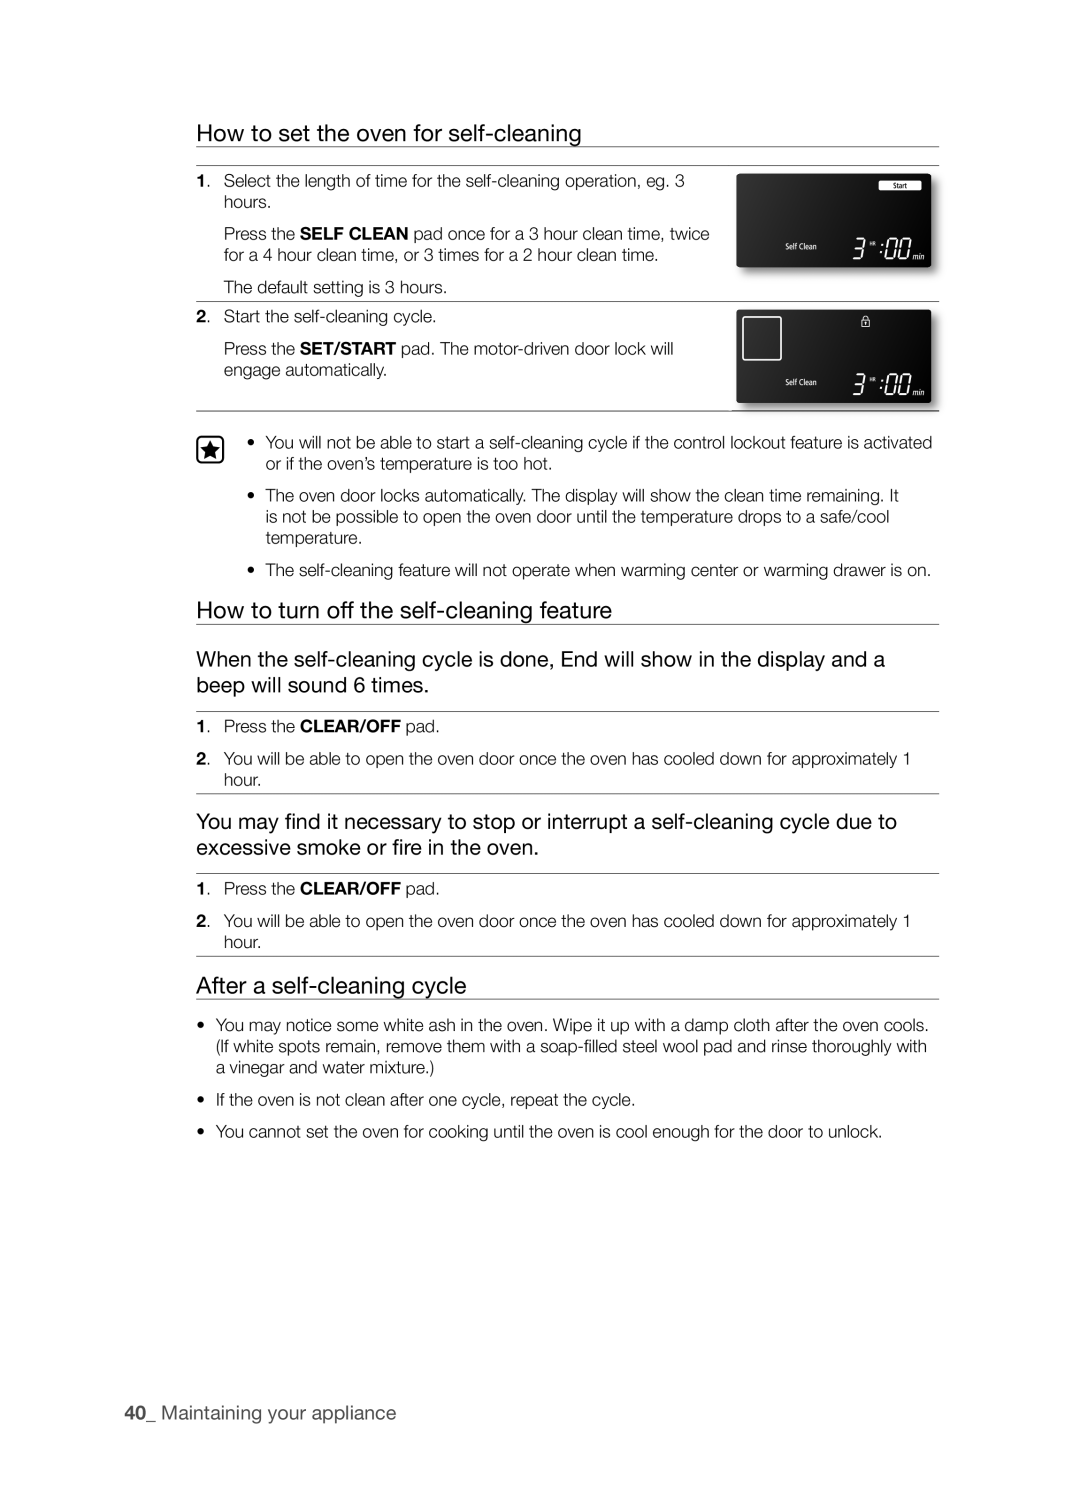 Samsung FTQ386LWUX user manual How to set the oven for self-cleaning, How to turn off the self-cleaning feature 